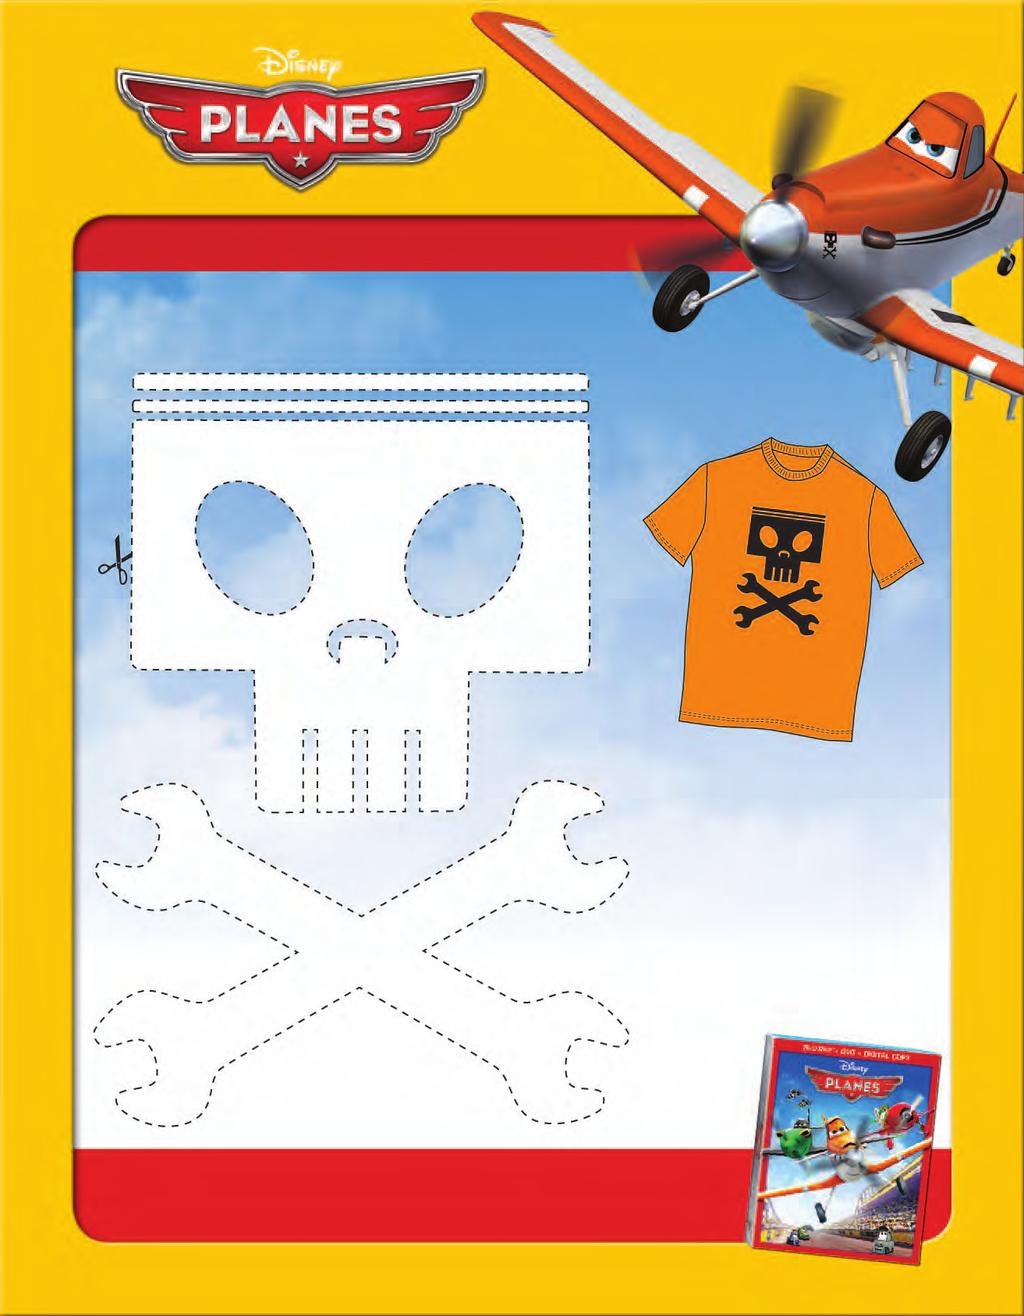 JOLLY WRENCHES SQUADRON STENCIL CRAFT YOU WILL NEED: T-shirt, Newspaper, Craft Knife or Scissors, Non-toxic spray paint.